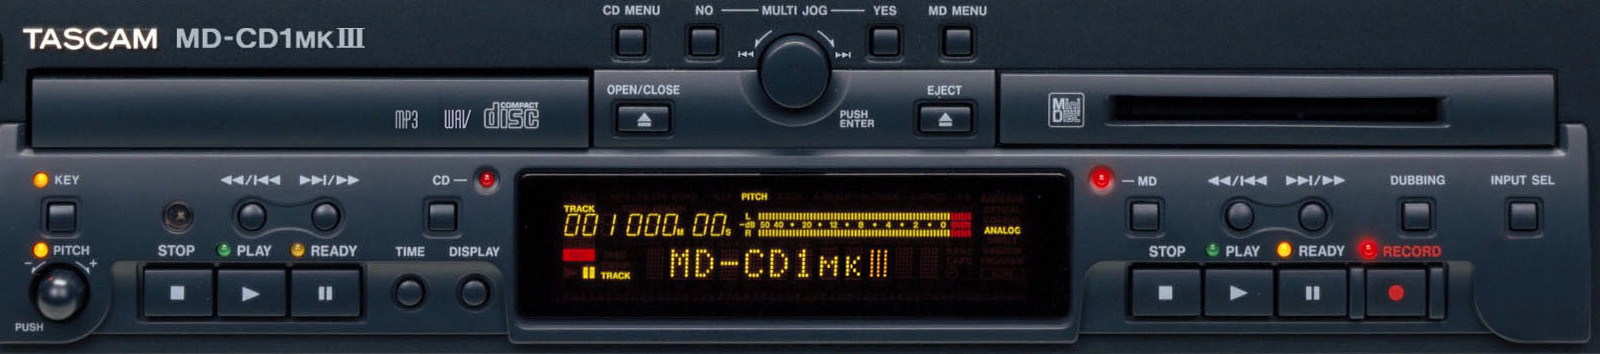 MD-CD1MKIII | FEATURES | TASCAM - United States